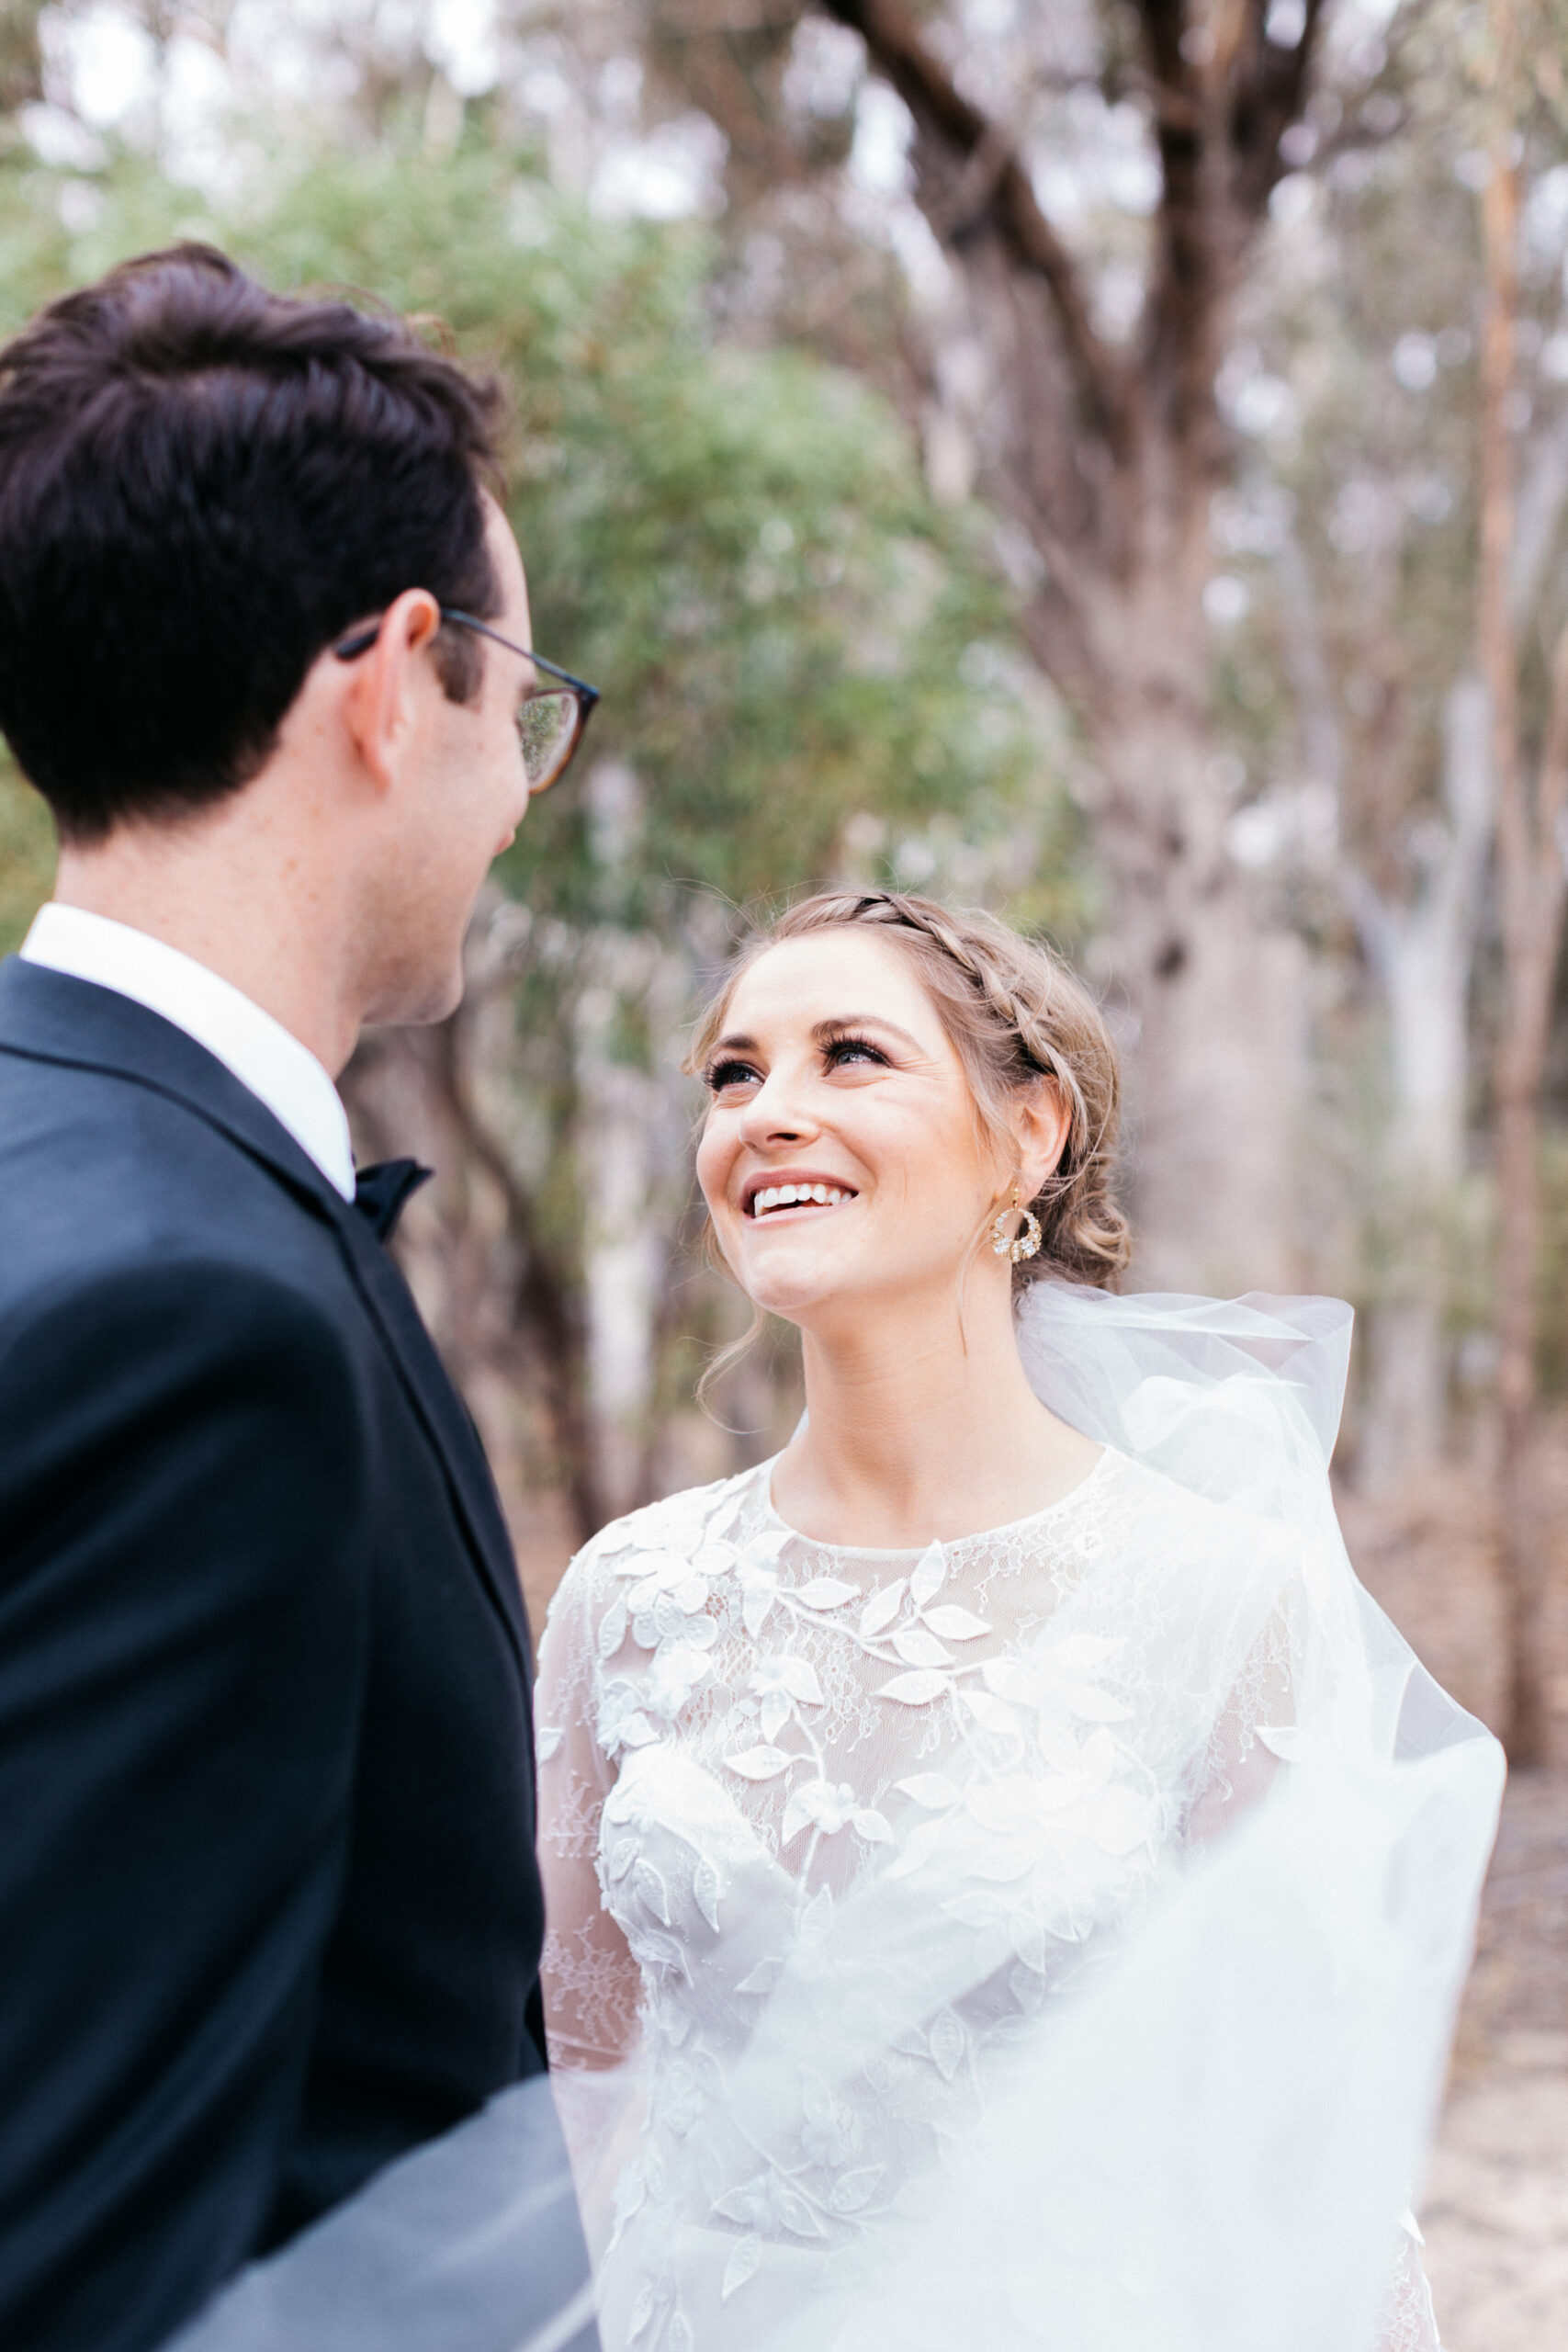 Holly Riley Native Bush Wedding The White Tree SBS 030 scaled